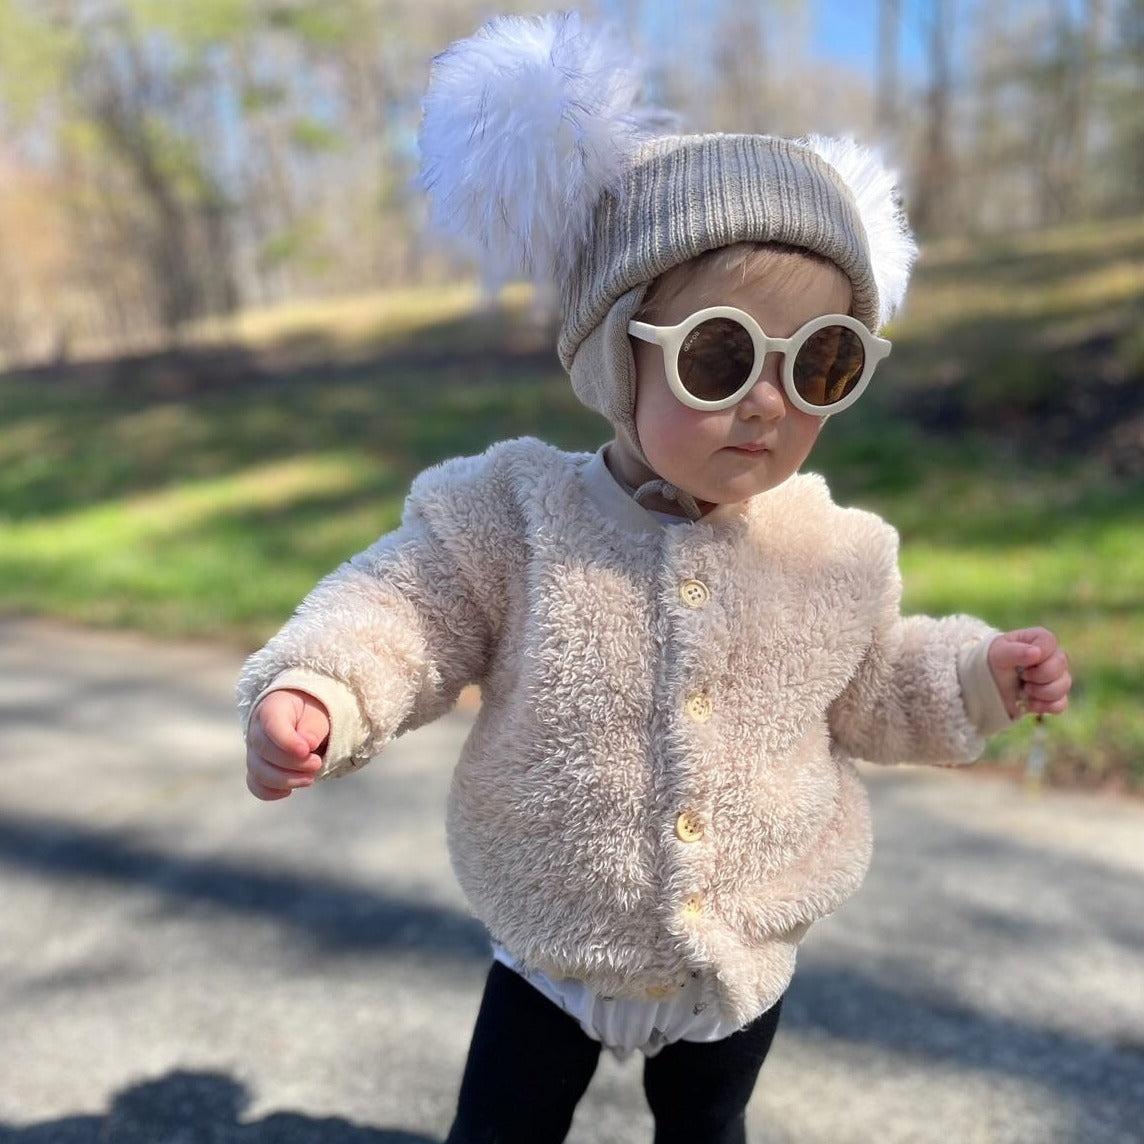 Kids' round sunglasses in various colors and styles